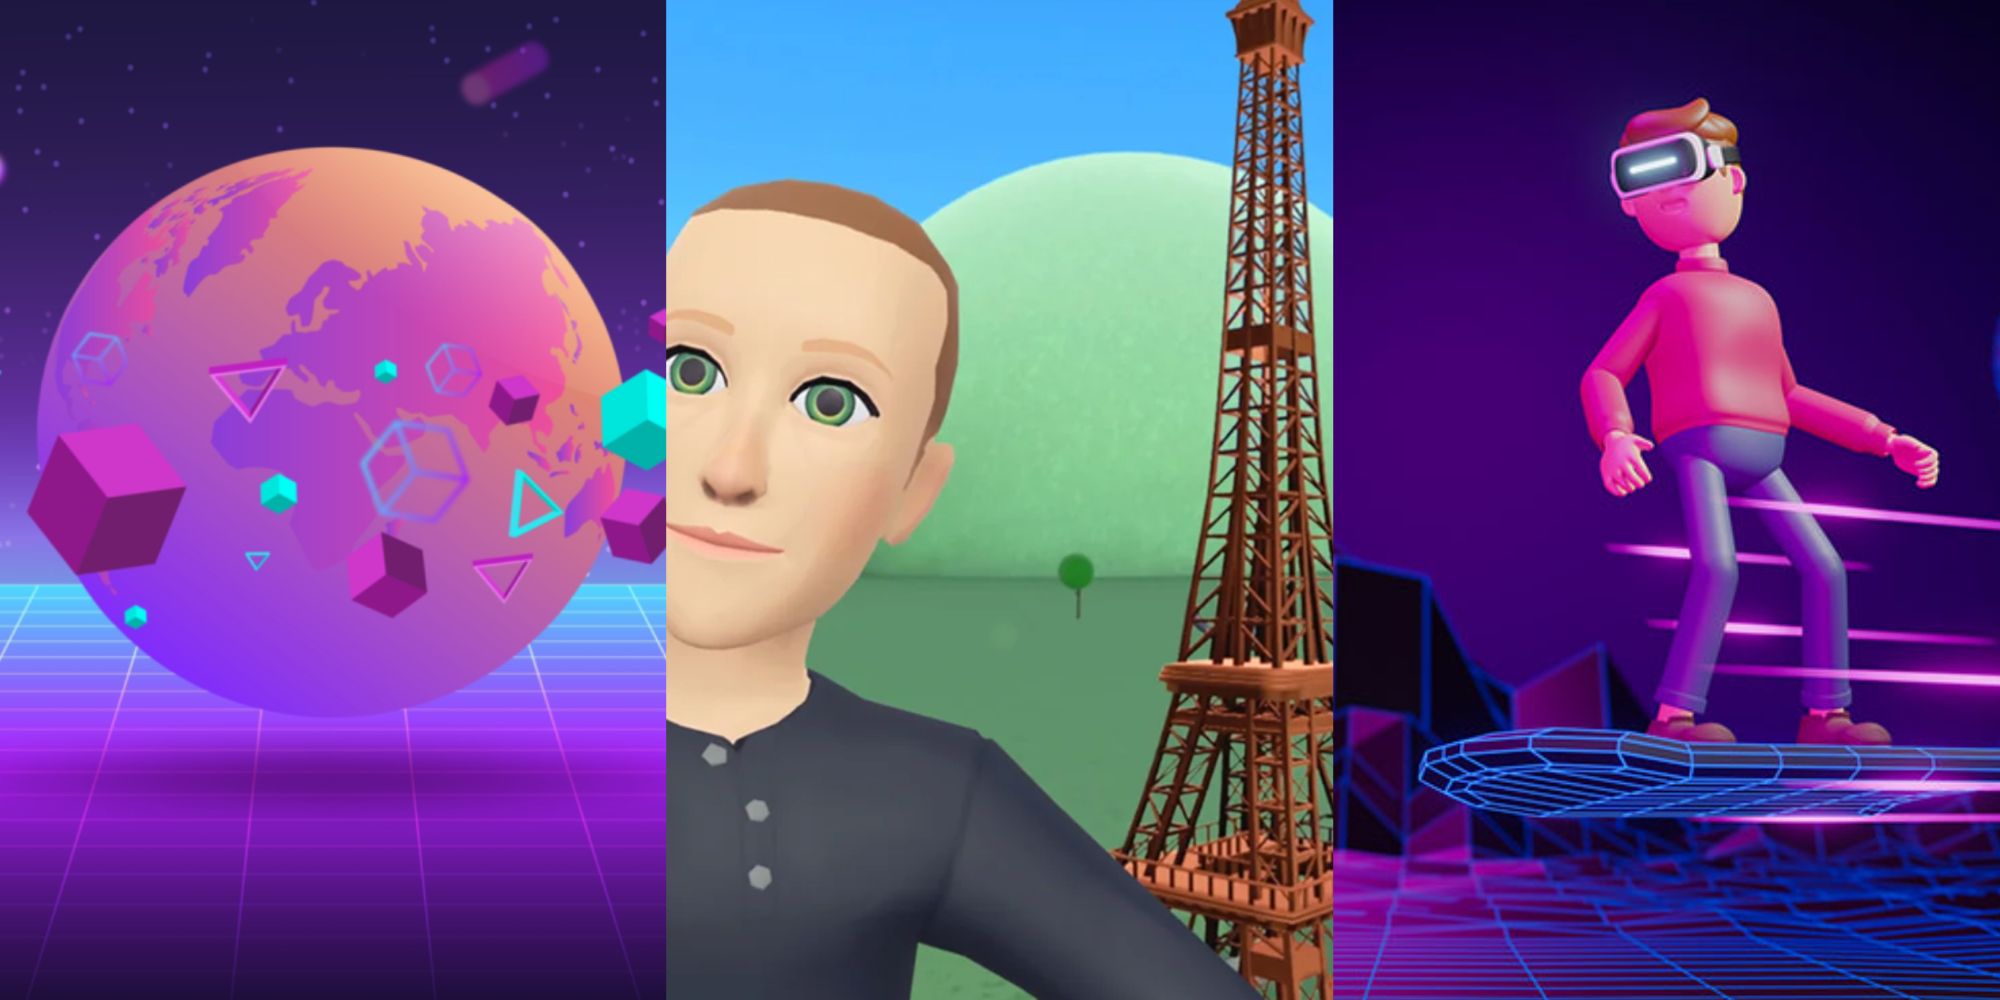 Split image of the Metaverse and Mark Zuckerberg feature